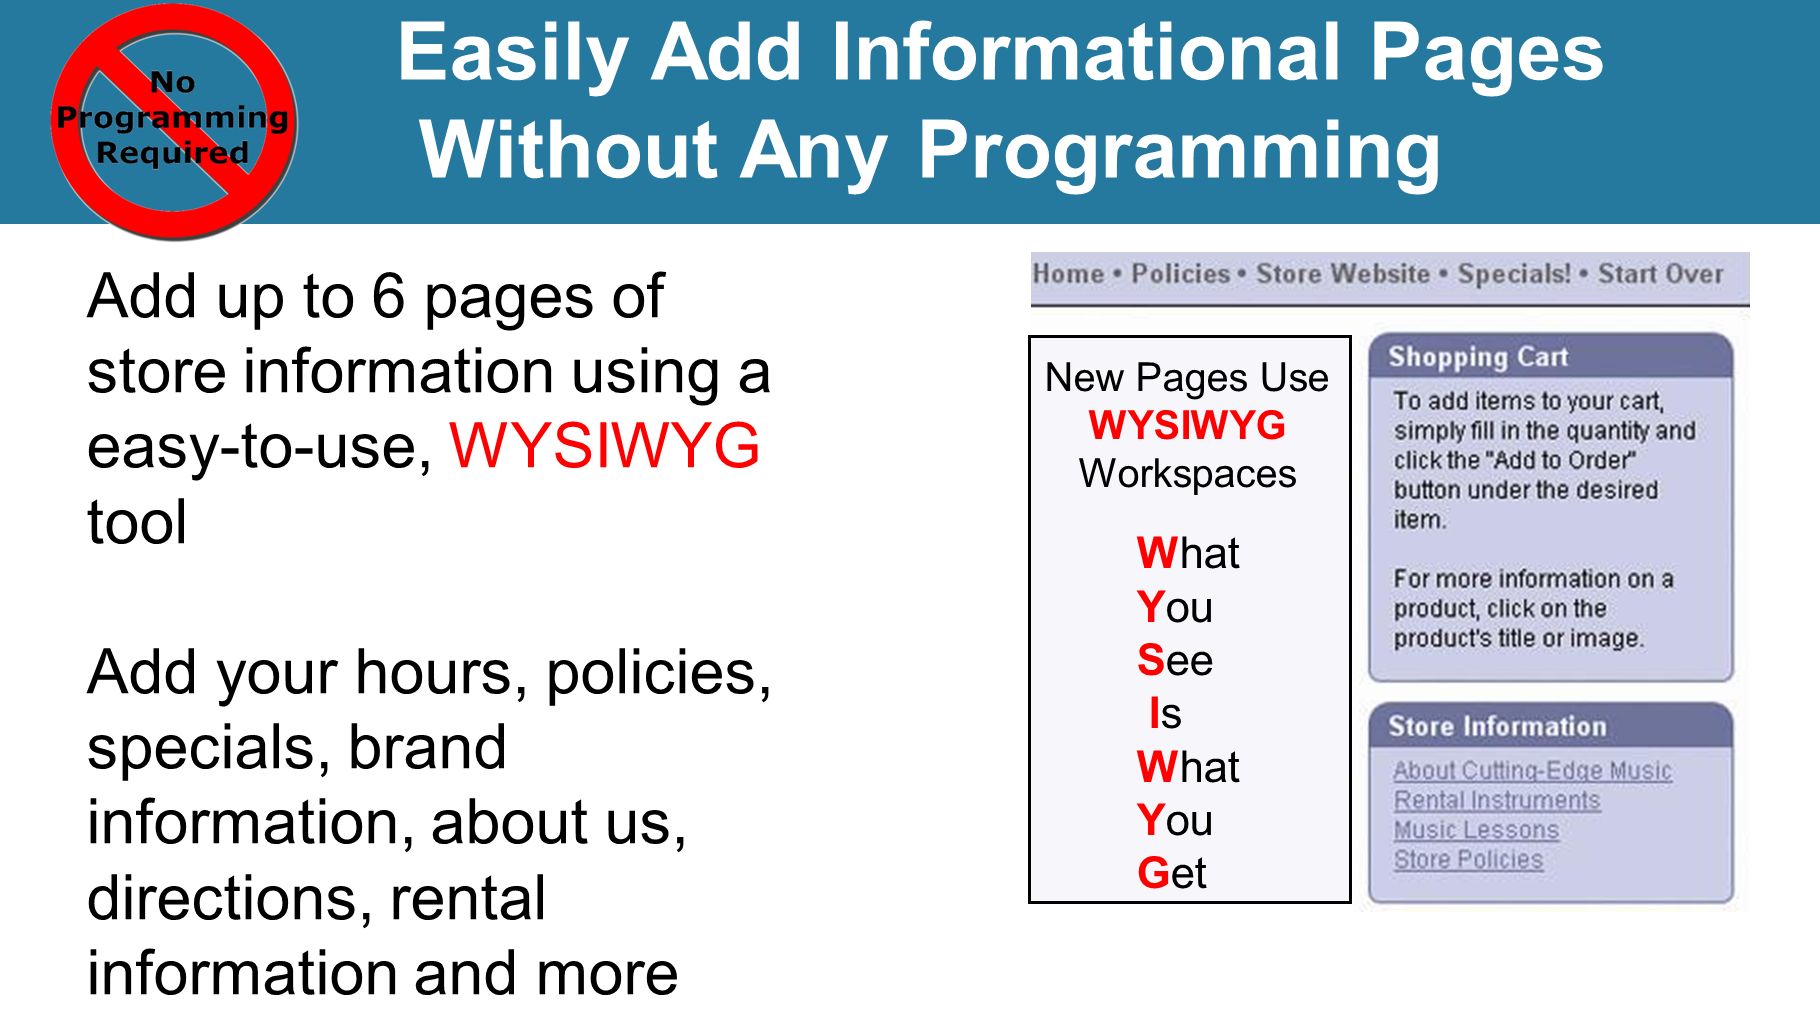 Add up to 6 pages of store information using a easy-to-use, WYSIWYG tool Add your hours, policies, specials, brand information, about us, directions, rental information and more Easily Add Informational Pages Without Any Programming New Pages Use WYSIWYG Workspaces What You See Is What You Get